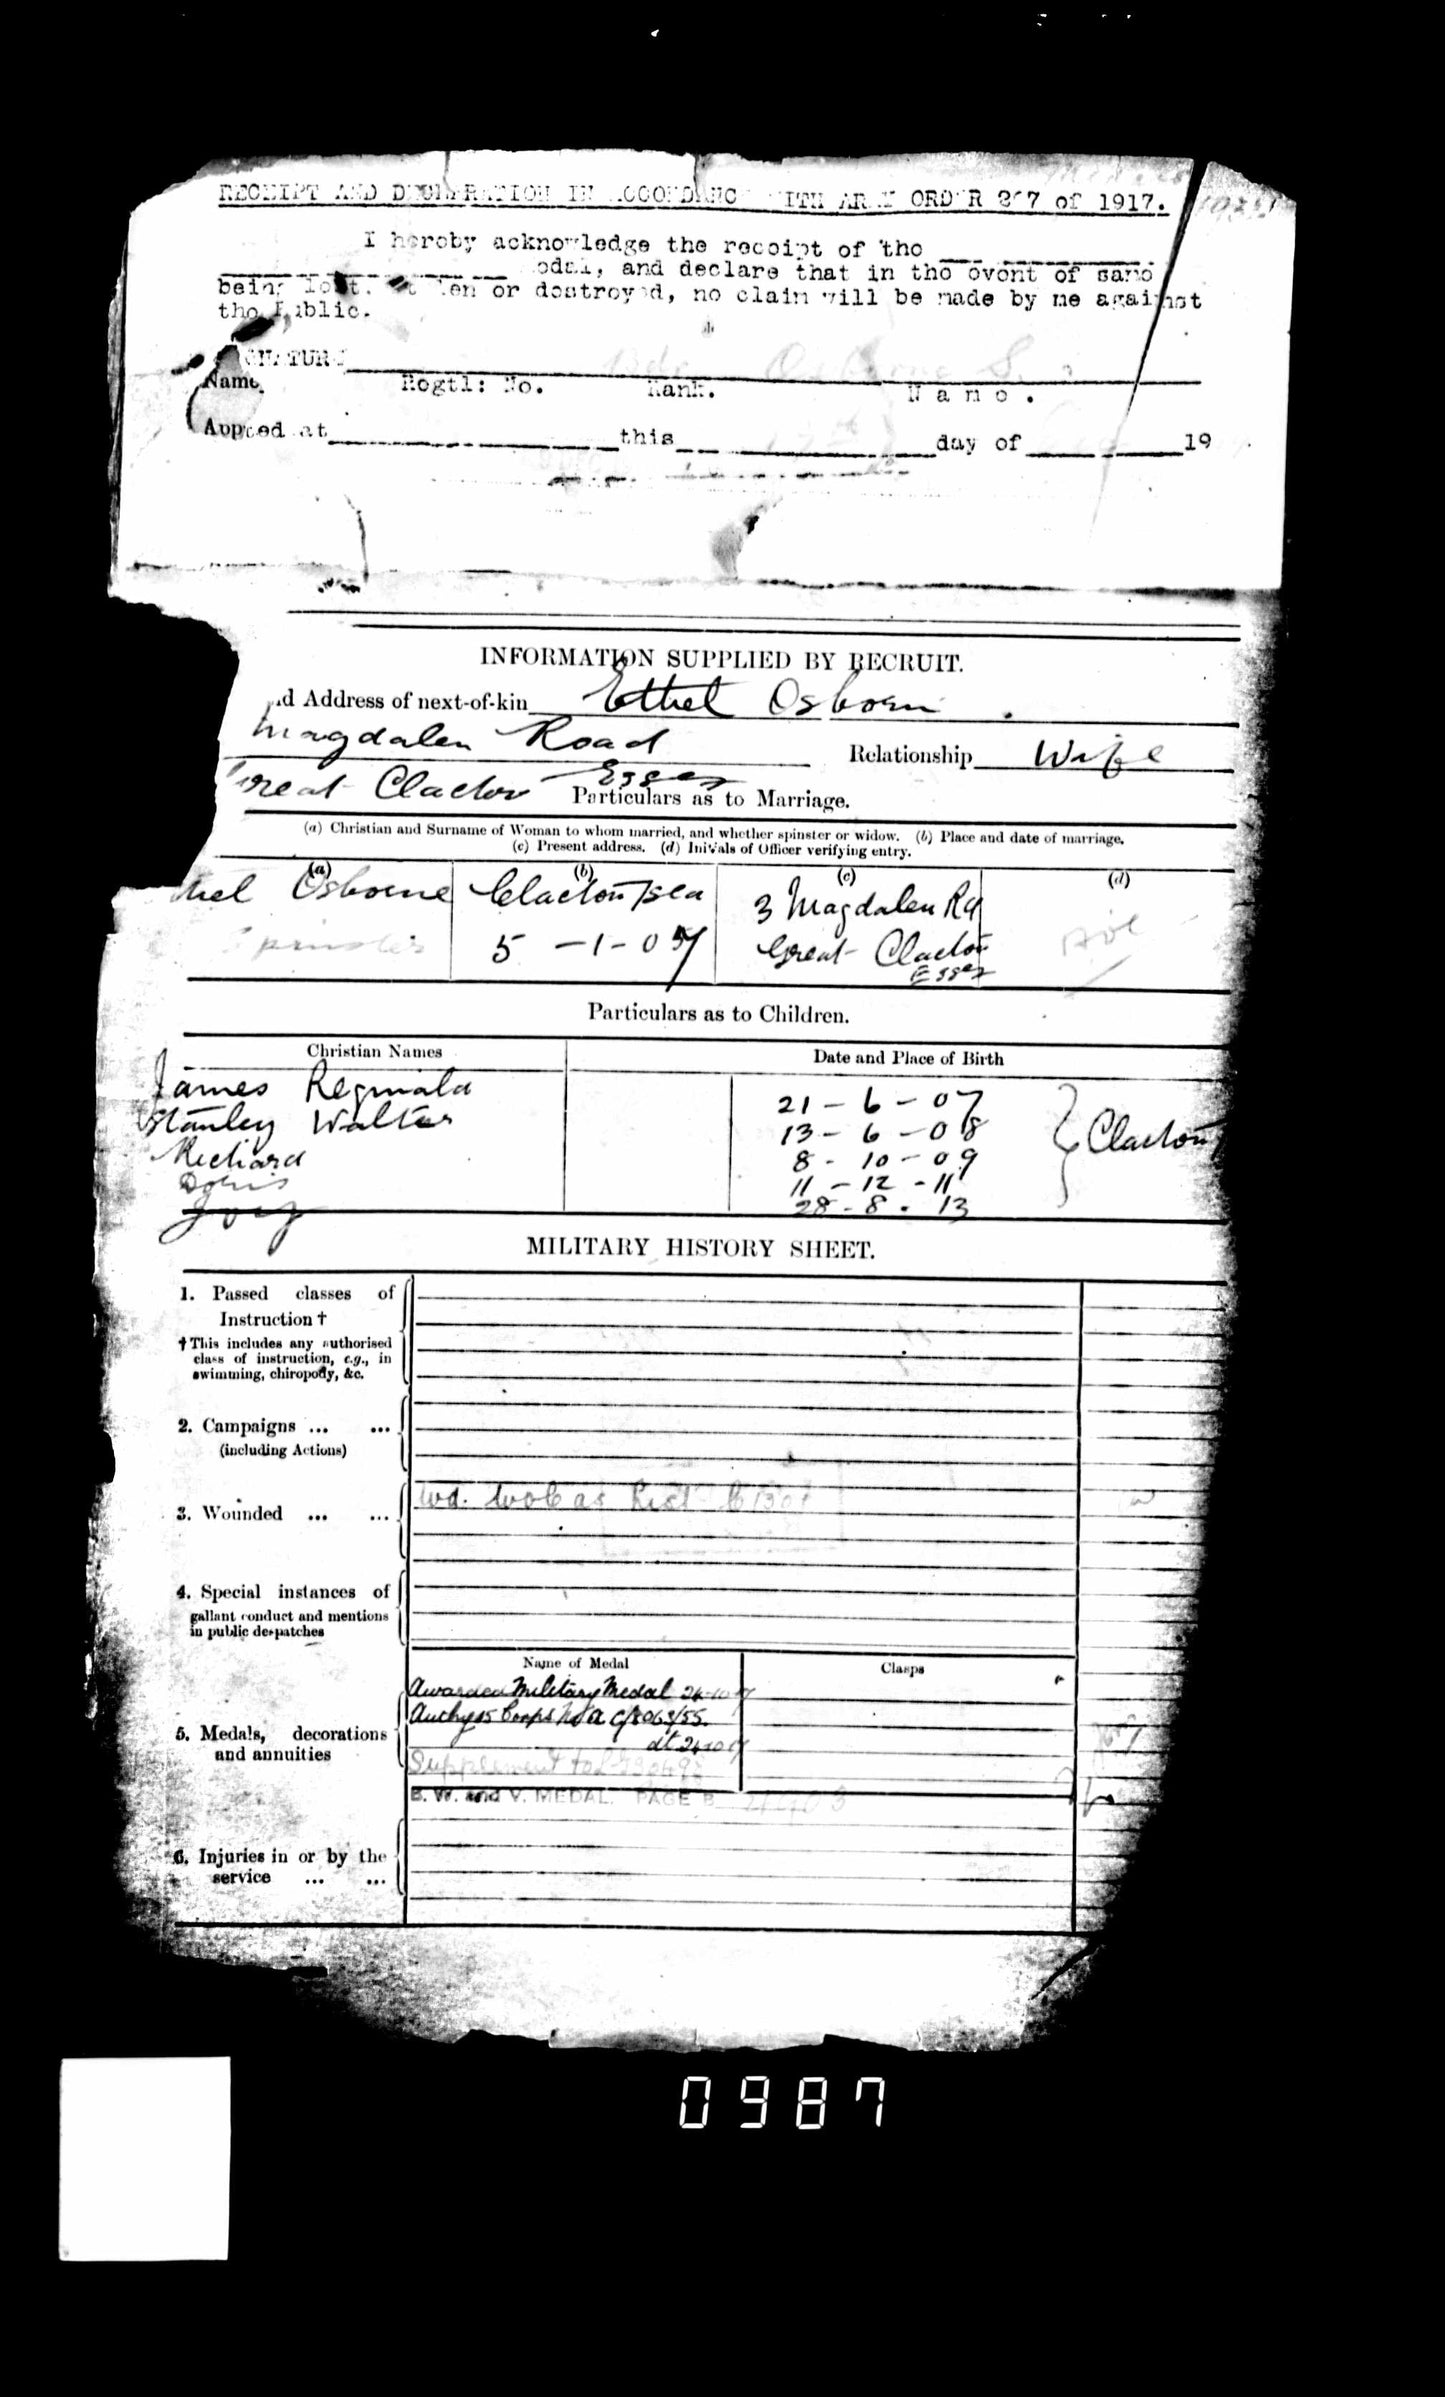 ww1 soldiers service record